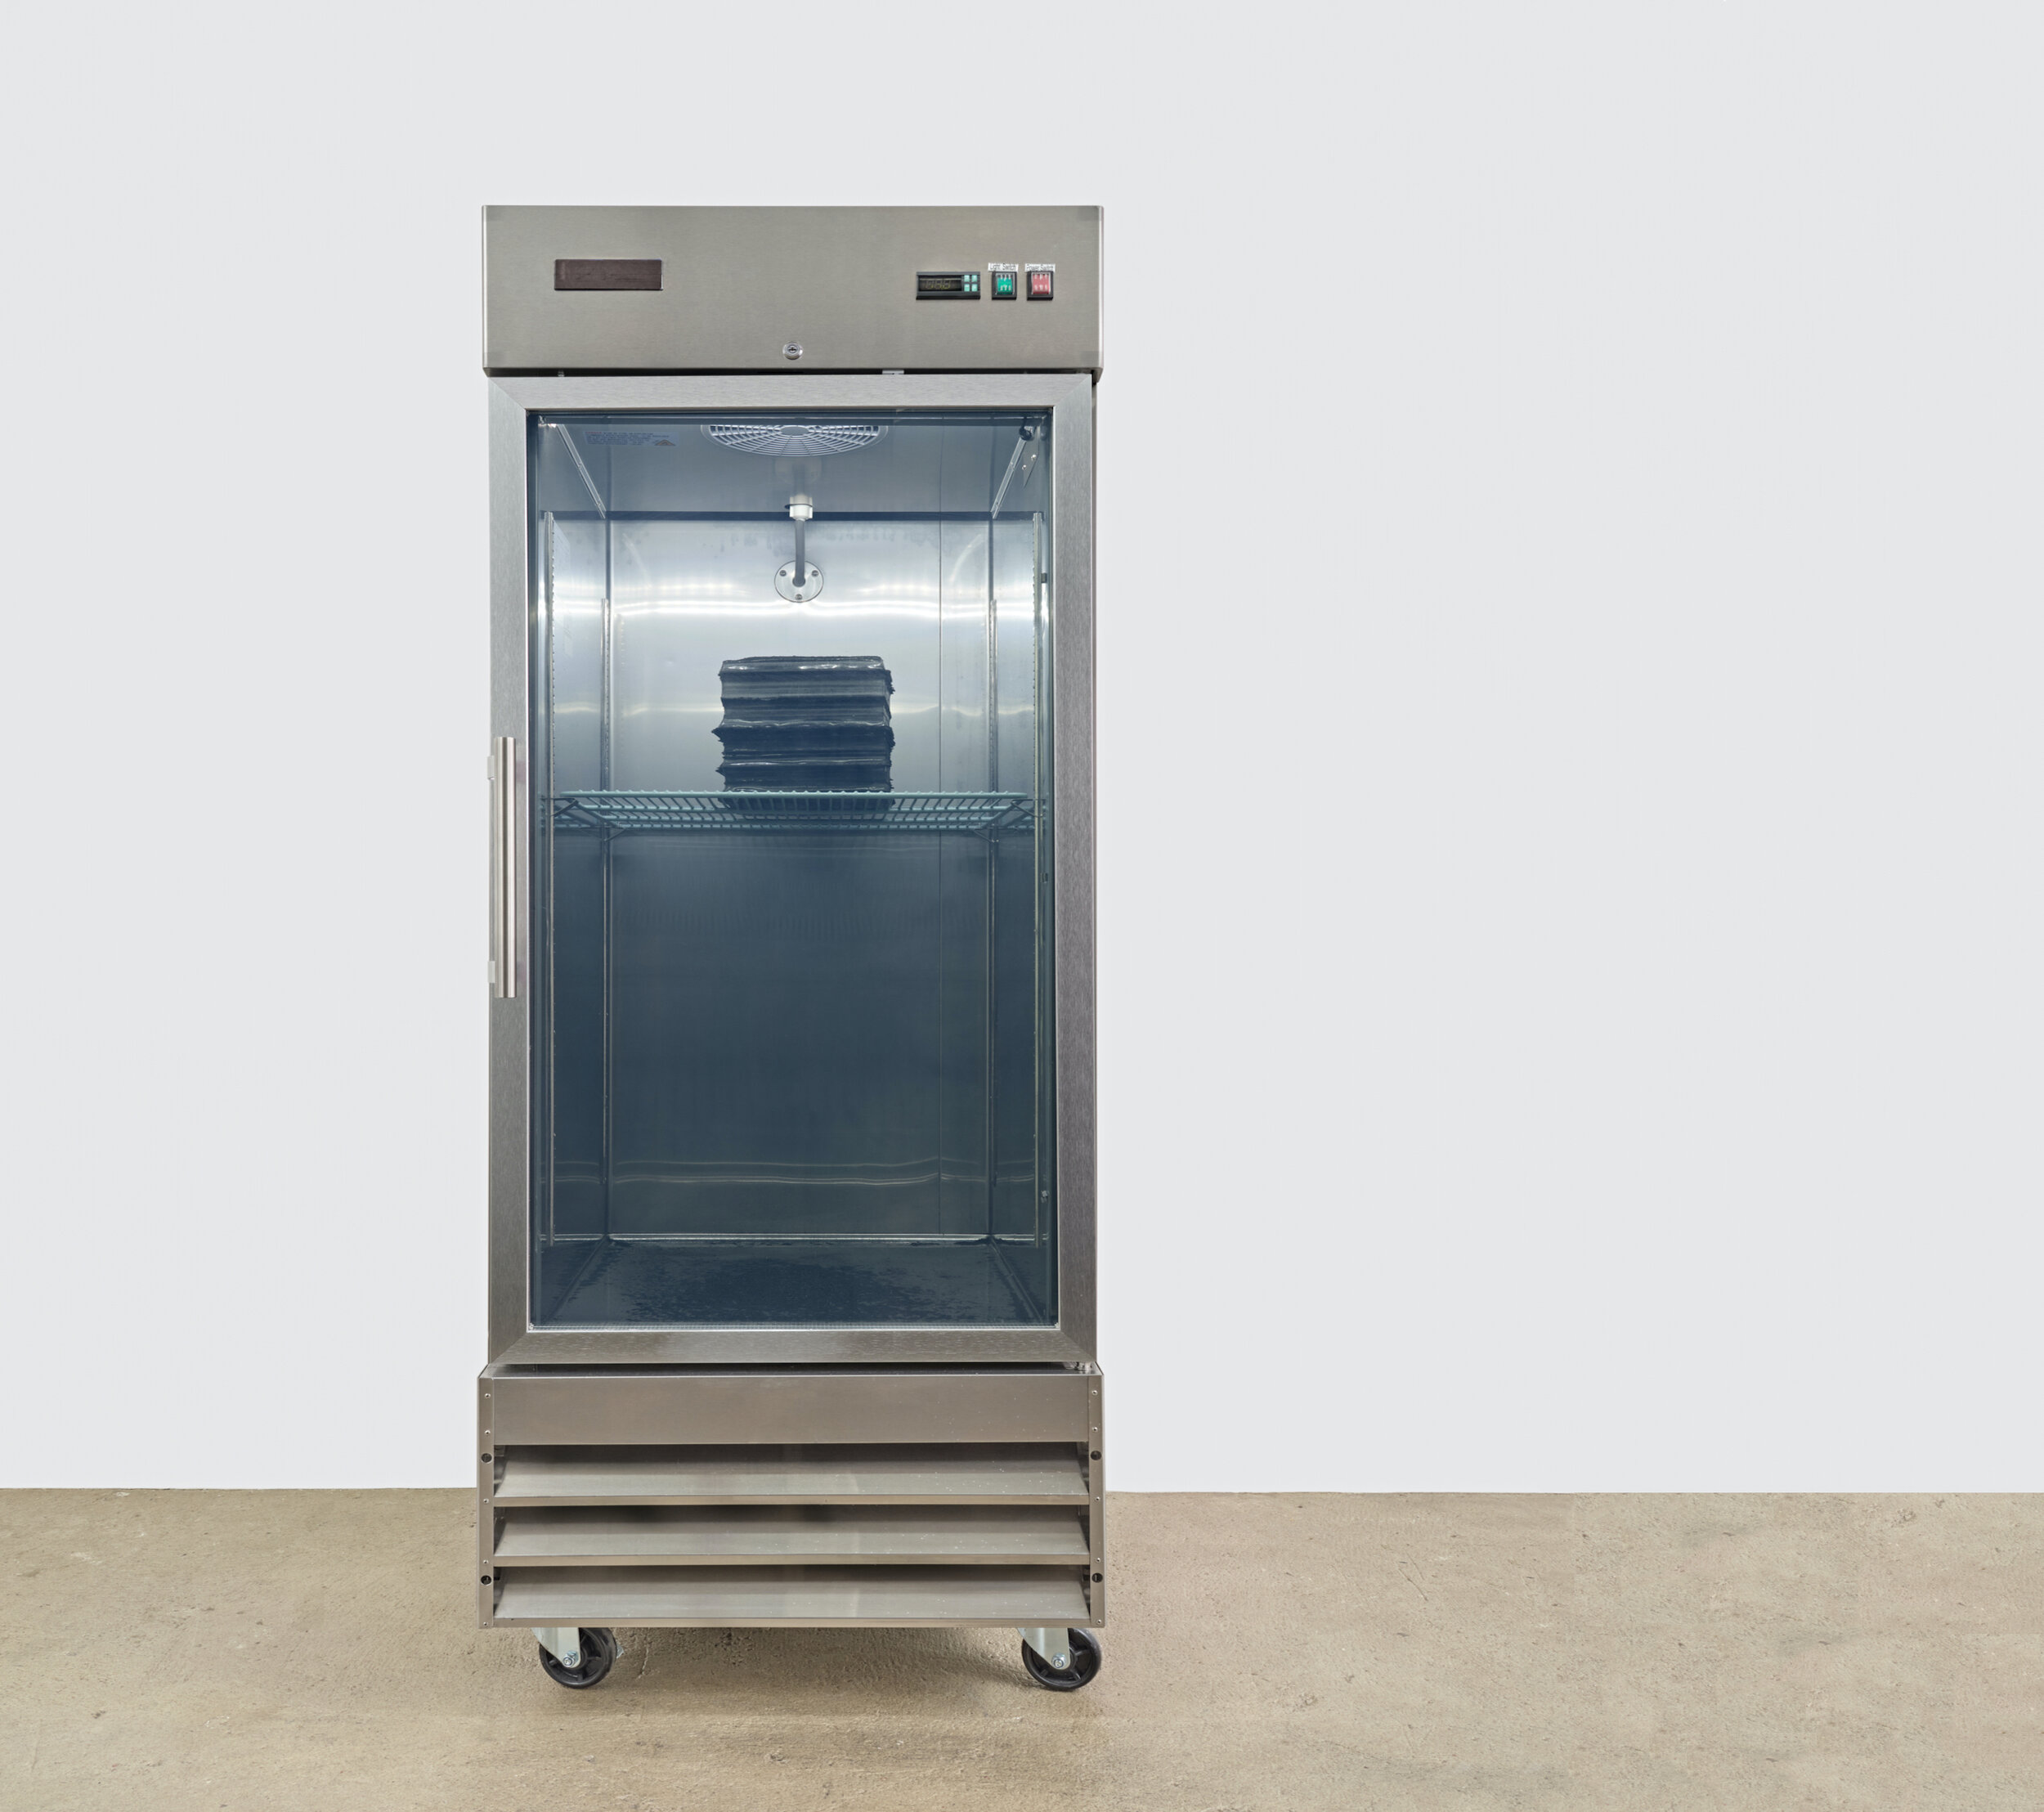  Sae Jun Kim  Solicitude in stratum’s loss , 2021 commercial freezer, water, carbon sediment  82 x 29 x 34 inches (208 x 74 x 86 cm) 